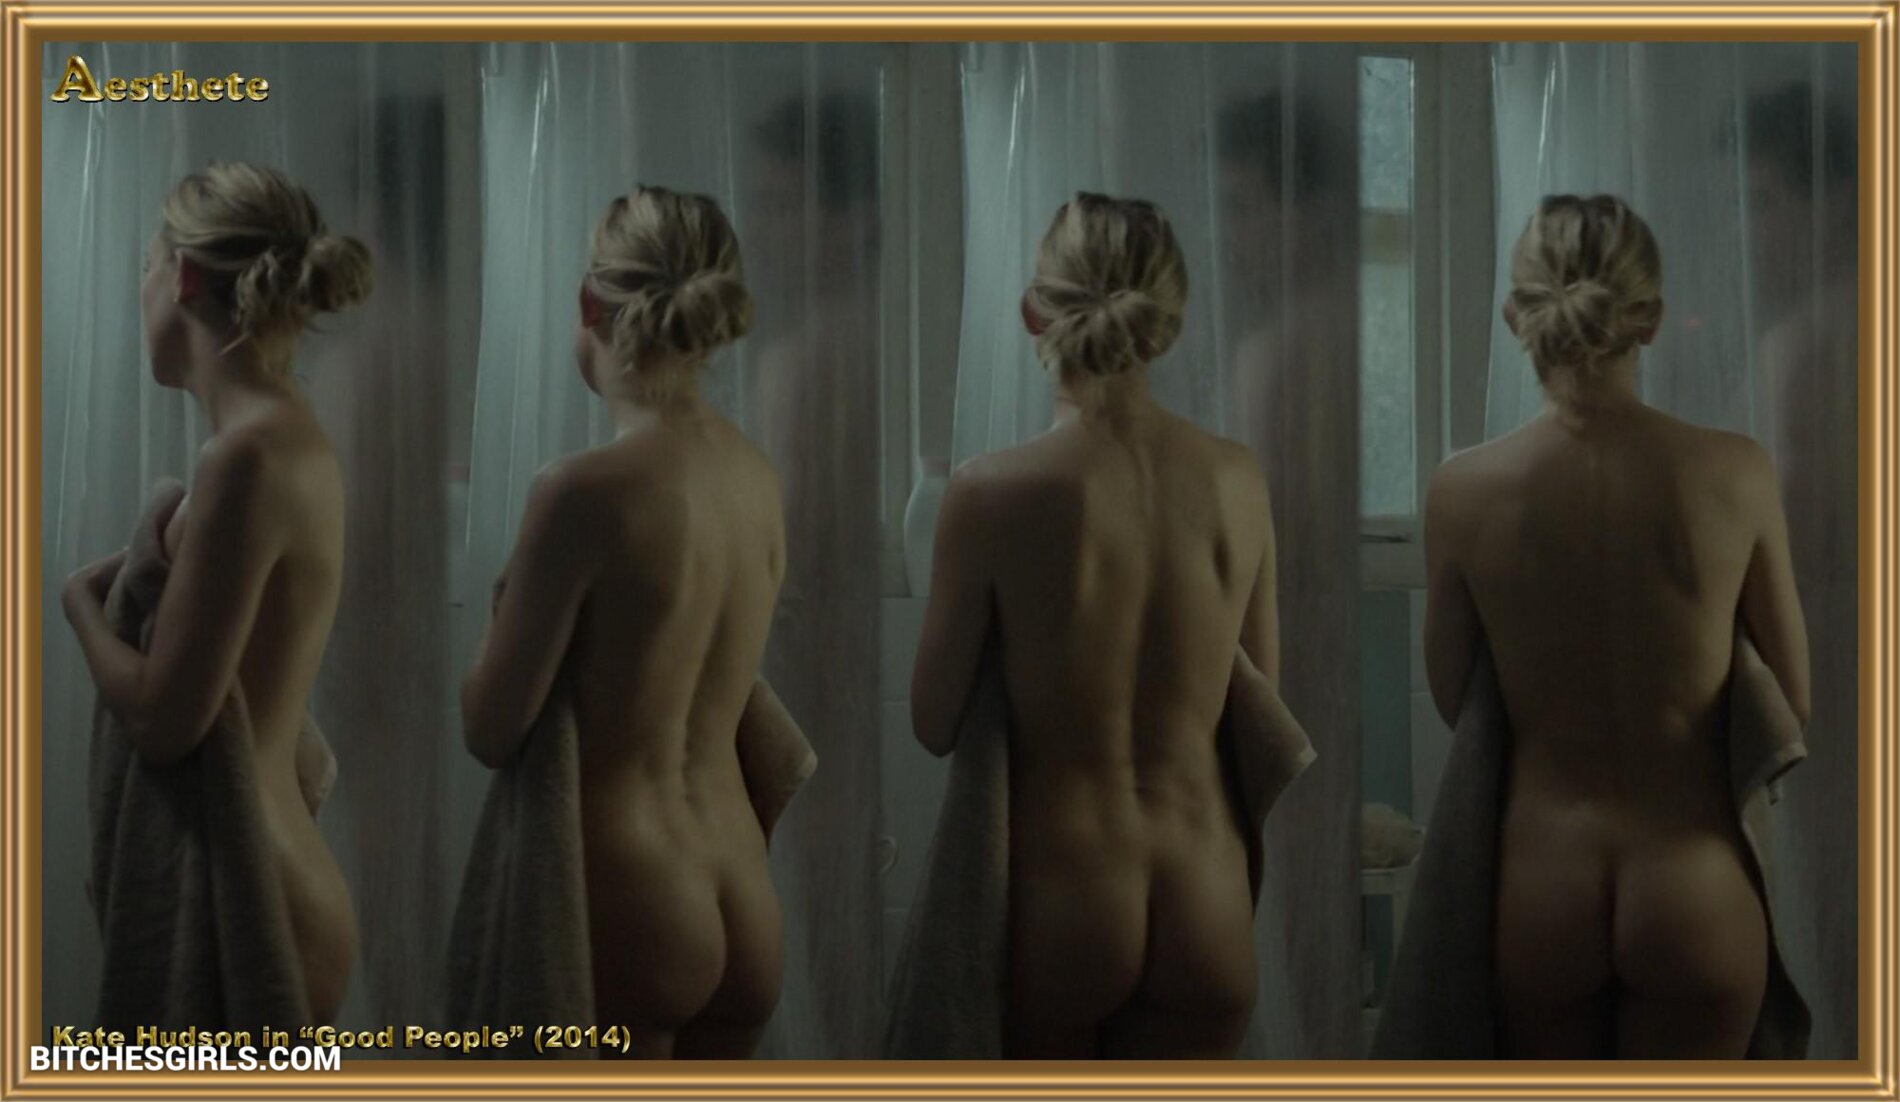 Get ready for a wild ride with the latest adult photography leaks of social media sensation, Kate Hudson! This stunning model is not holding anything back as she flaunts her nude body in exposed pics and lingerie images. These tantalizing leaks, from December 2022, can be found exclusively on leakwiki. Join in on the excitement as Kate Hudson goes wild, showcasing her bikini photos like never before. If you want to see more of her scandalous leaks, look no further than this hot content. Do you know Kate Hudson's real name? She may be F18+, but can you guess her age? Don't miss out on the steamy details of Kate Hudson's latest escapades!